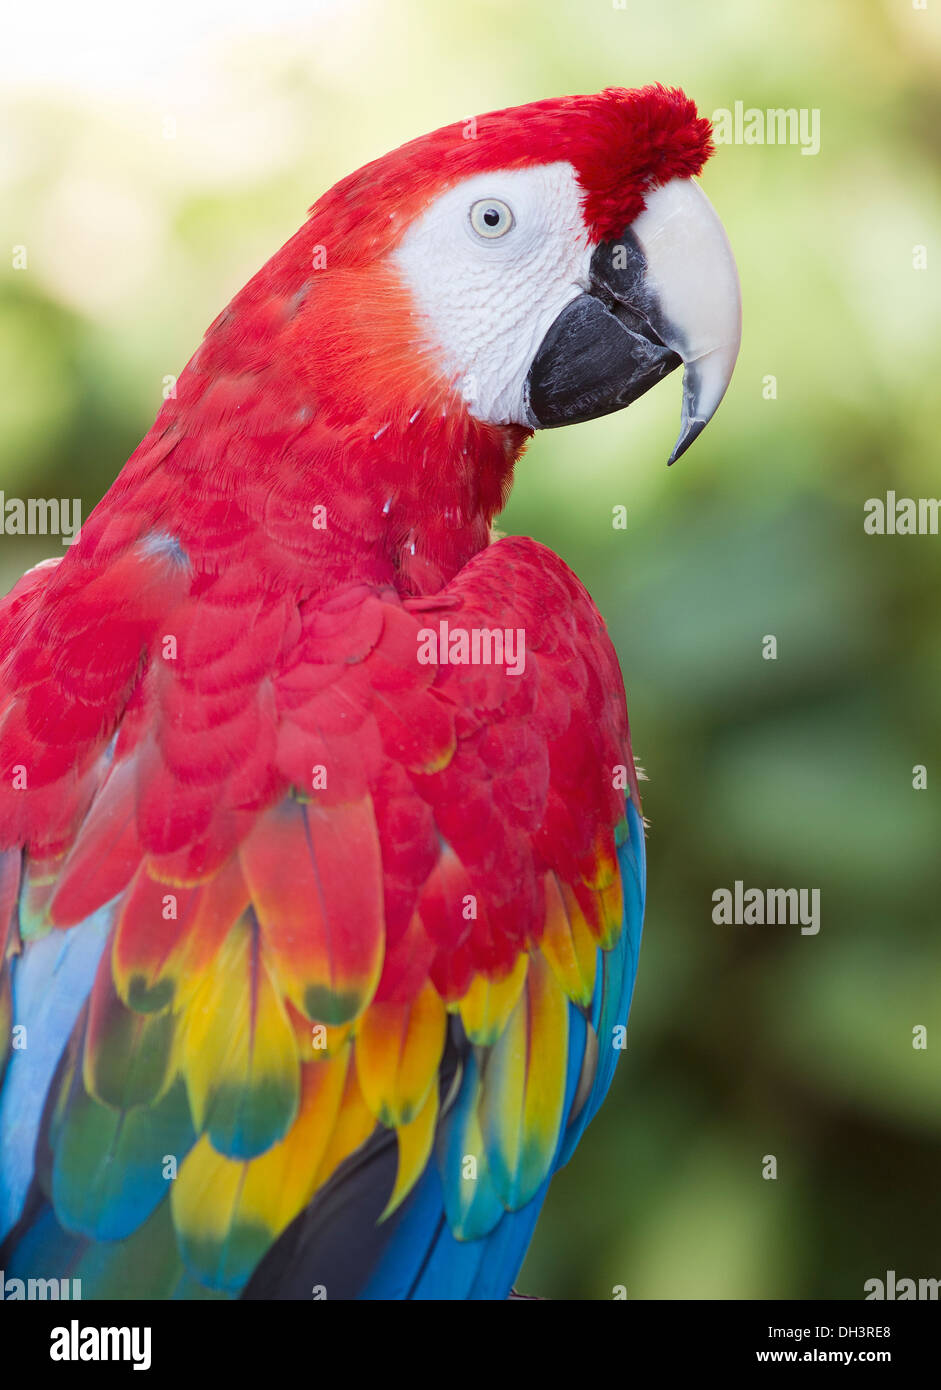 The Scarlet Macaw is a large, colorful macaw. It is native to humid evergreen forests in the American tropics. Stock Photo